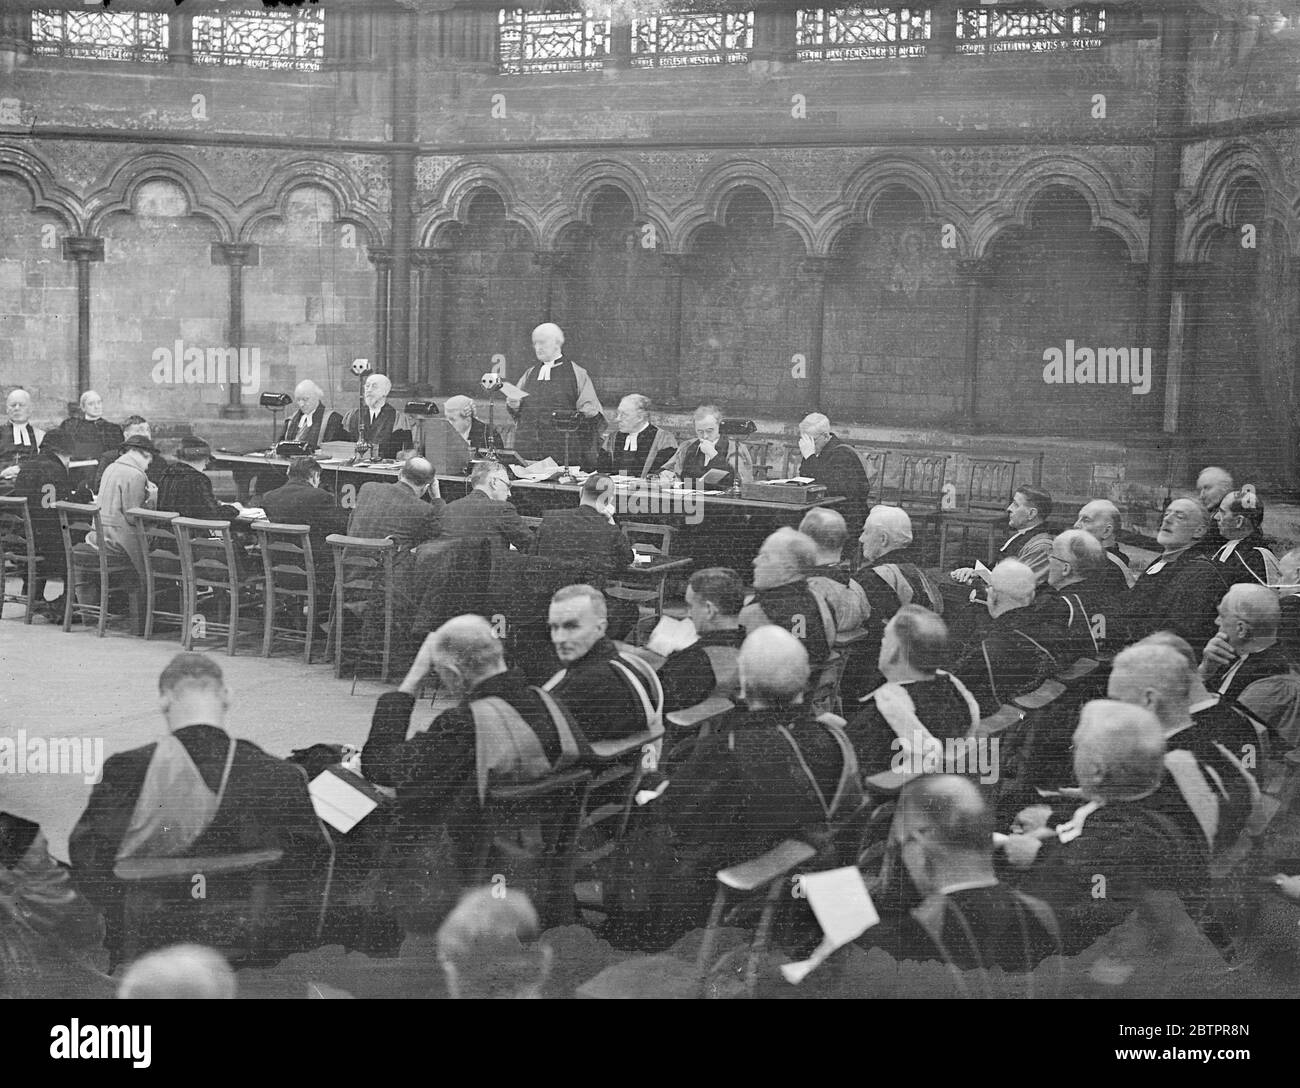 Westminster. The Dean of Norwich, as Prolocutor, opened the January group sessions of the lower house of Convocation of Canterbury in the Chapter House of Westminster. A spirited debate was anticipated when the interim report of the joint committee on the Church and State Report was sent down from the Upper House. Photo shows, The Lower House in session at the Chapter House, Westminster. 19 January 1938 Stock Photo